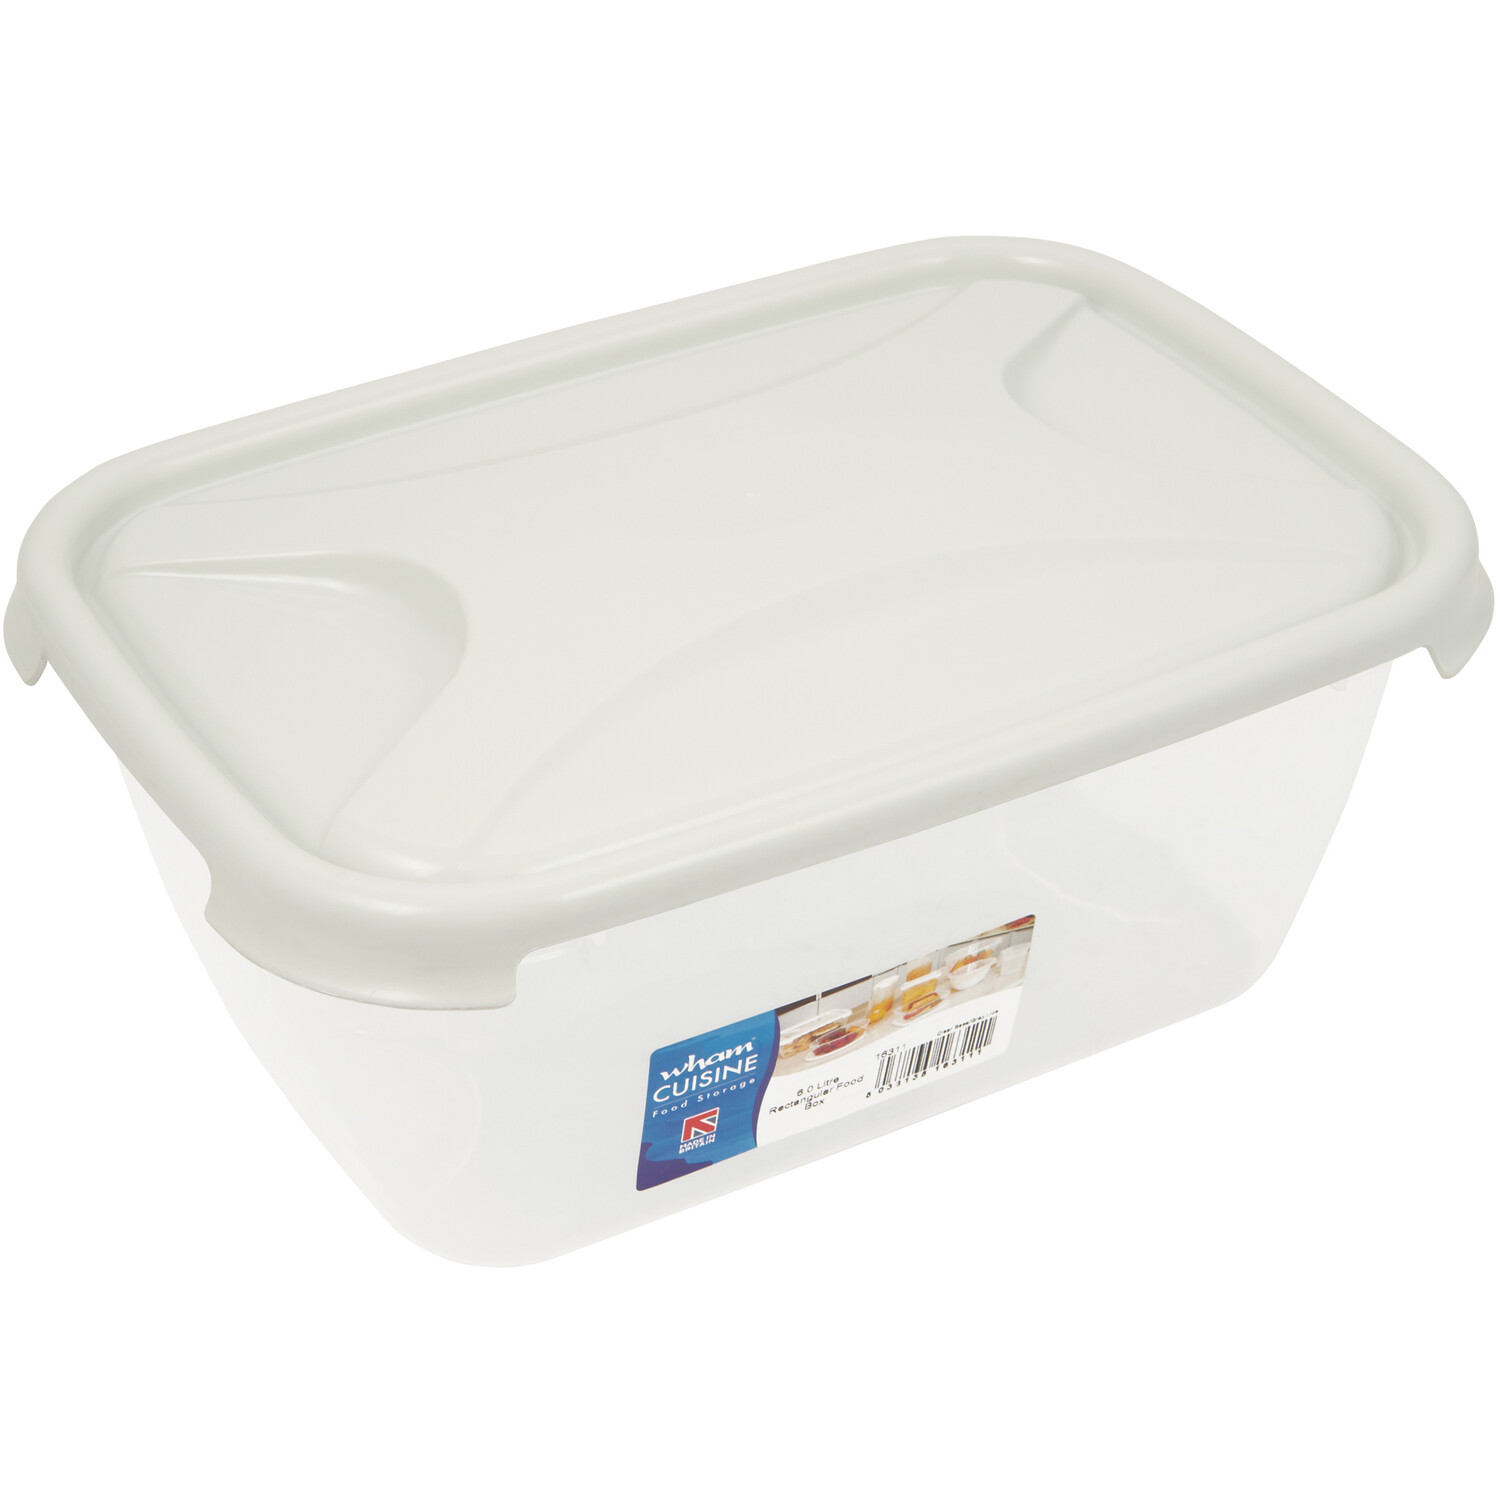 Studio Food Box with Flexible Lid - Clear / 2l Image 2